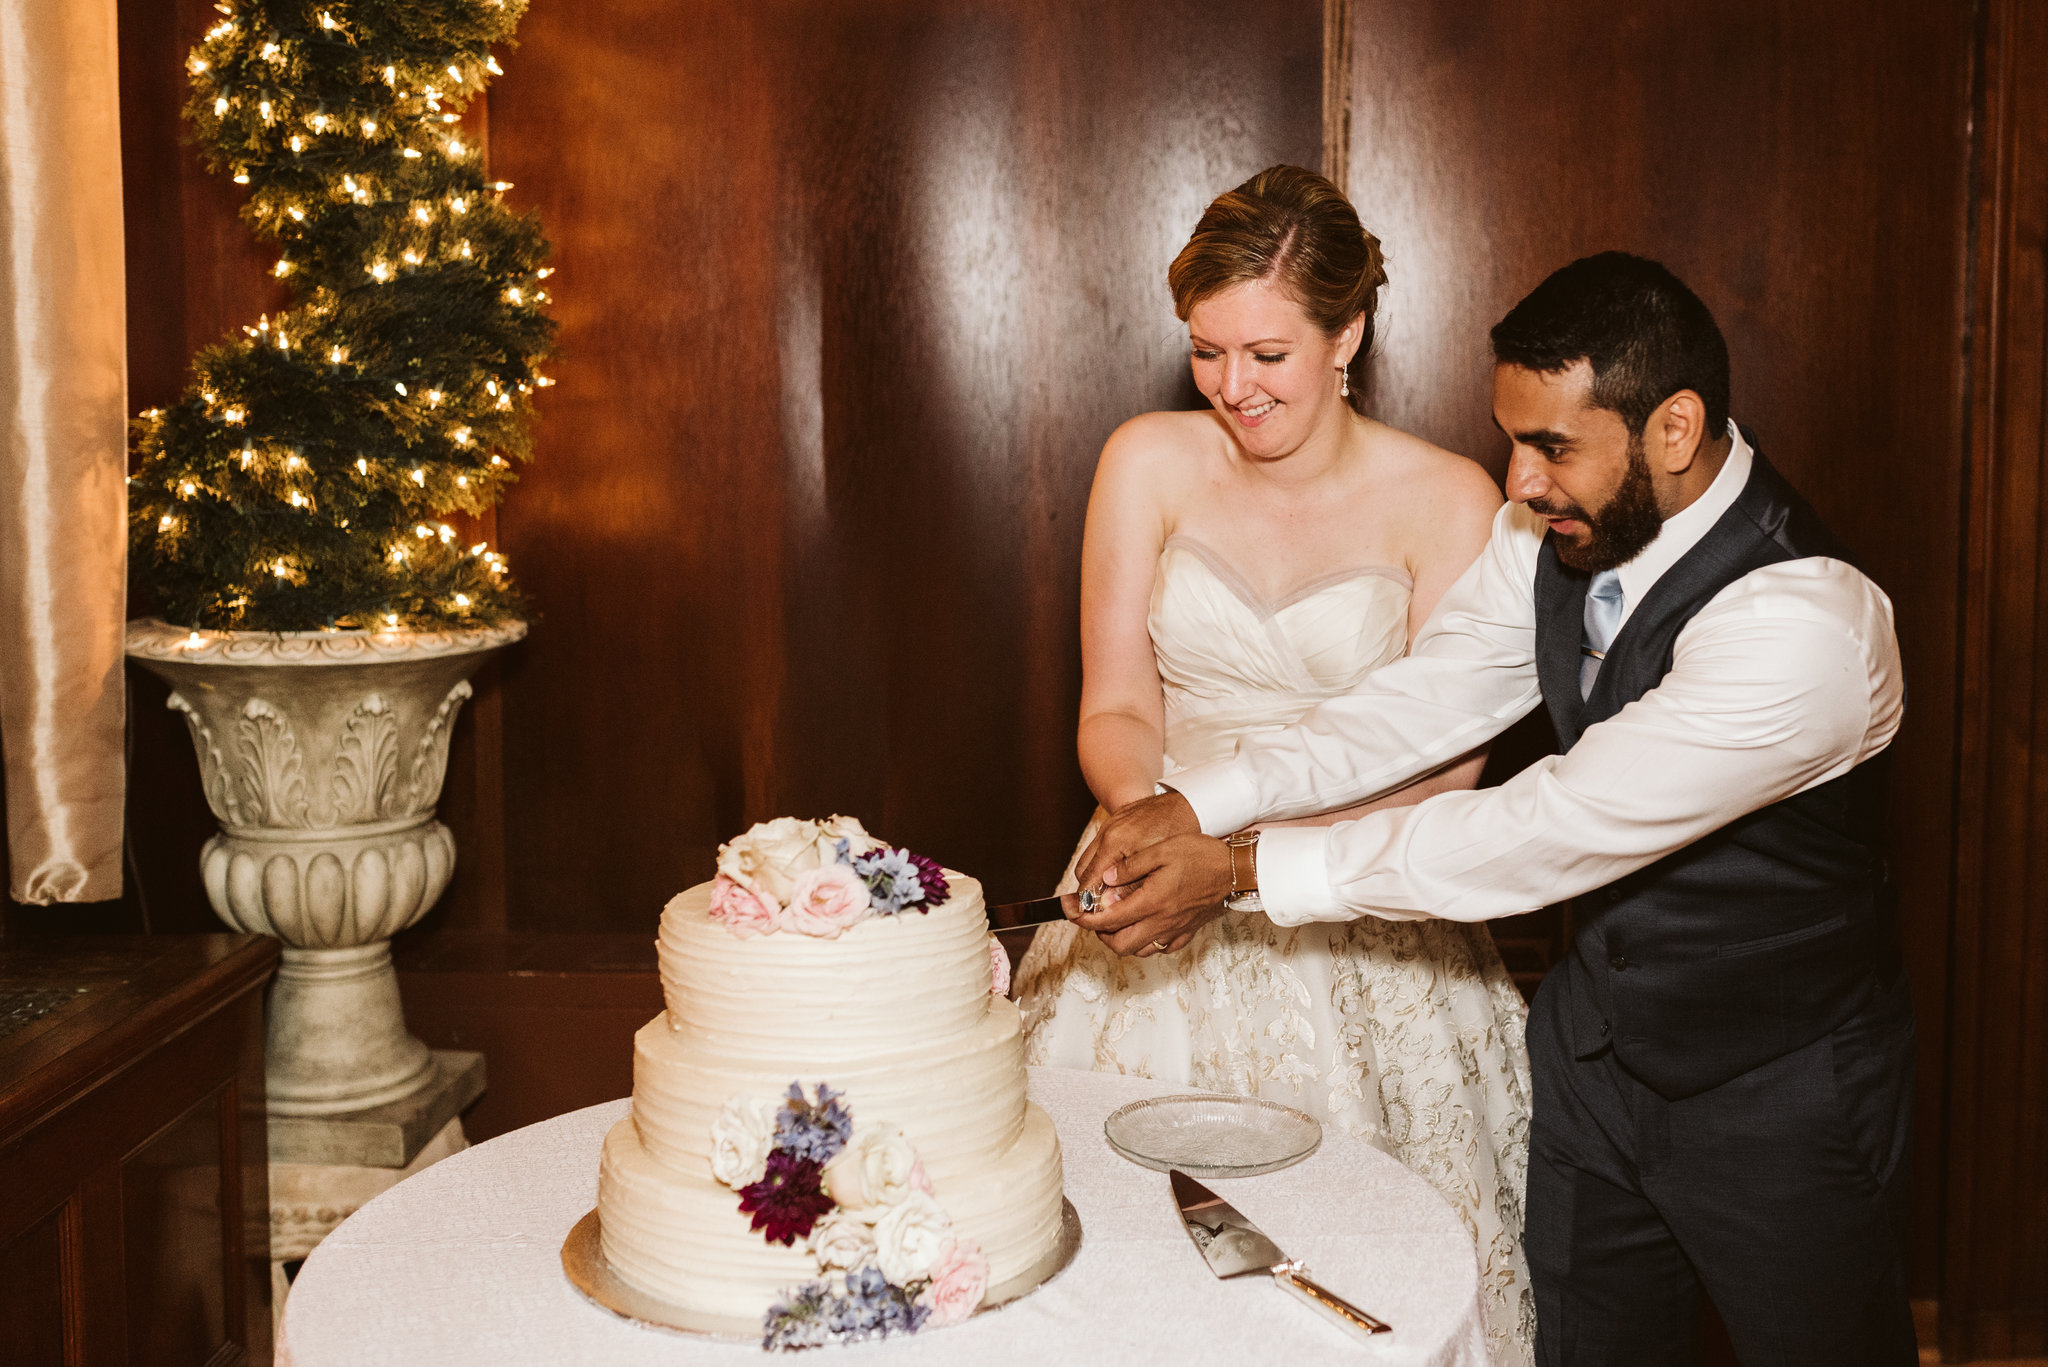  Ellicott City, Baltimore Wedding Photographer, Wayside Inn, Summer Wedding, Romantic, Traditional, Bride and groom Cutting the Cake, Once Upon a Crumb 